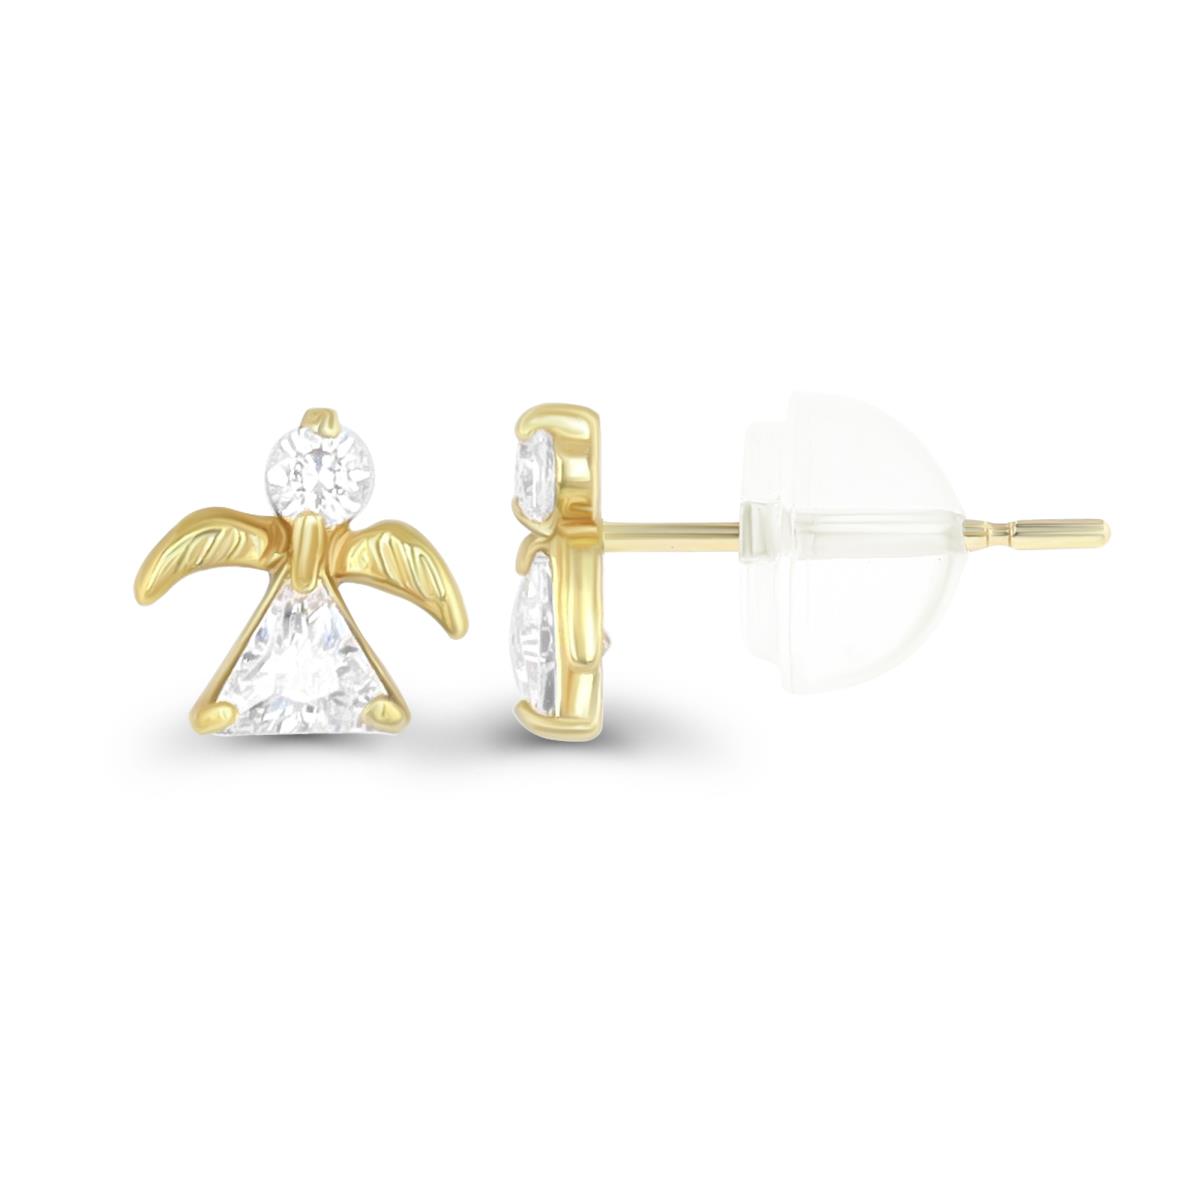 10K Yellow Gold 6.5mm Round and Trillion Little Angel Stud Earring